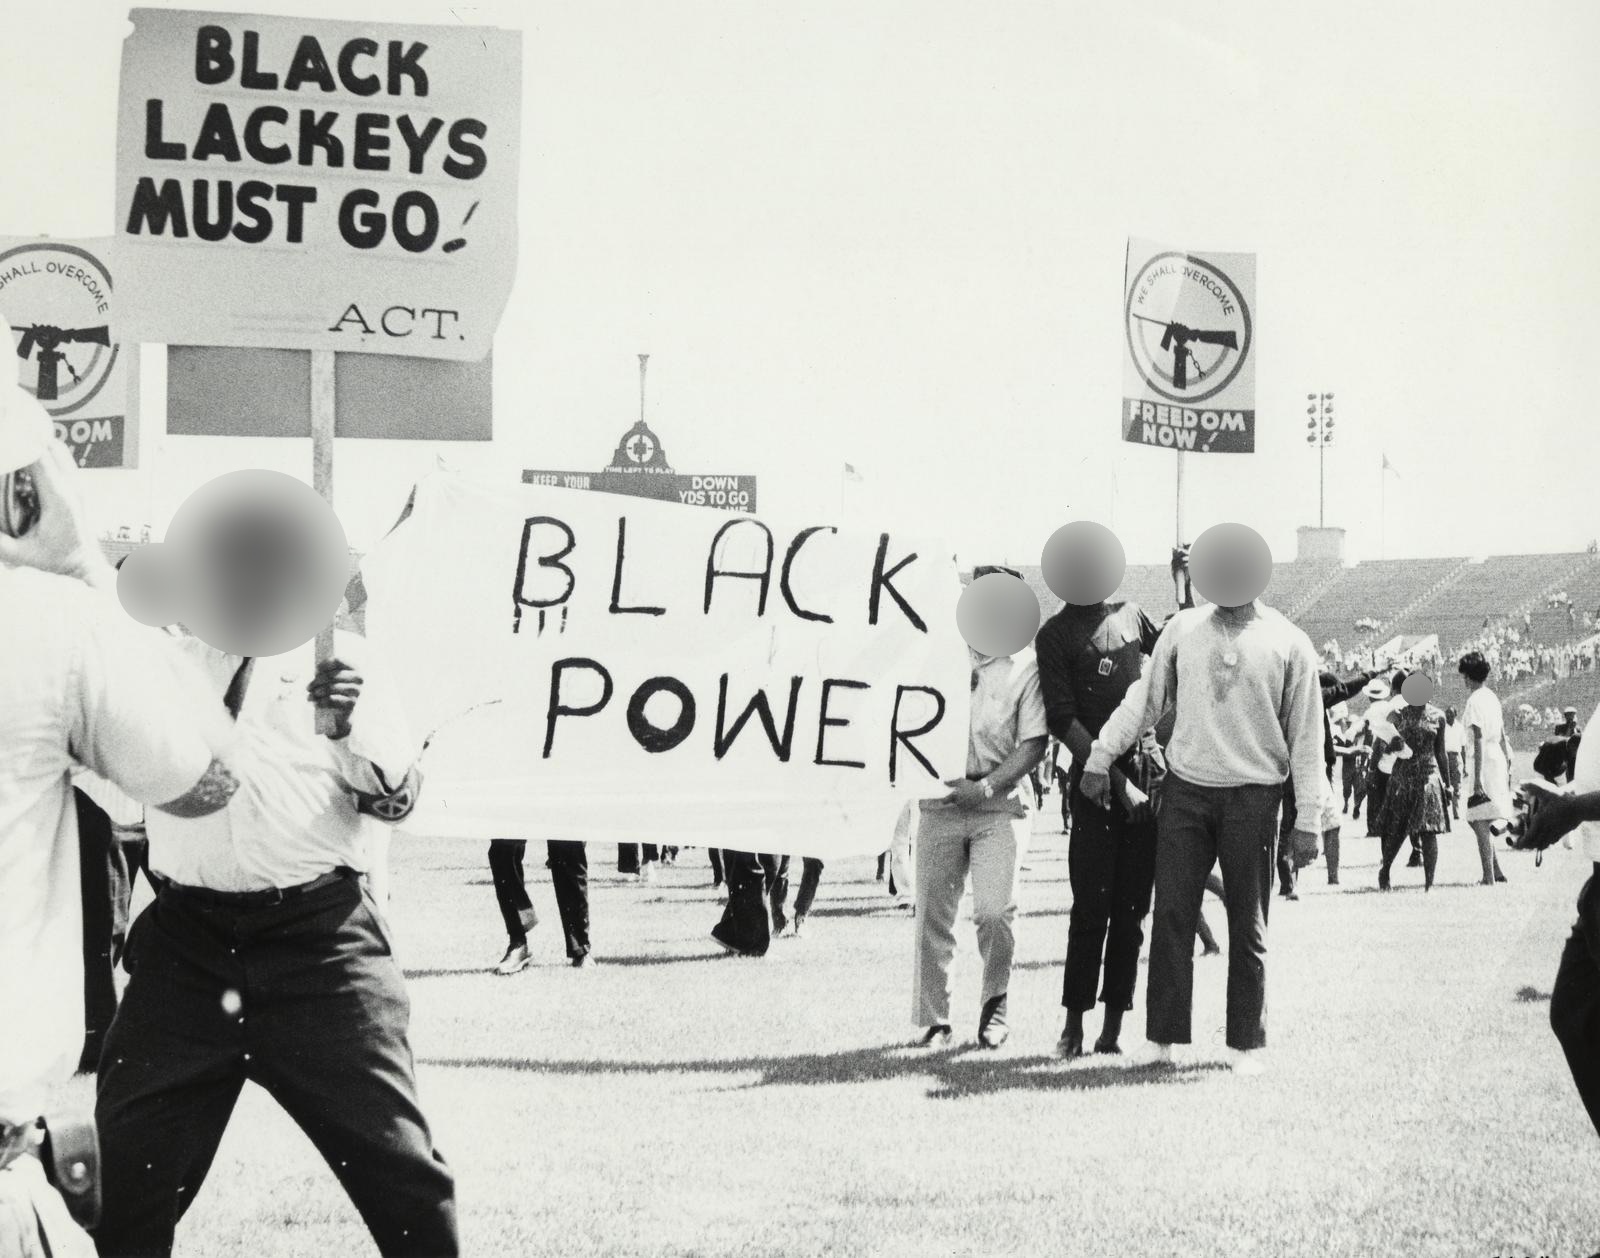 Example of blurring faces using Image Scrubber on a photo from the Black Power movement at the Chicago Freedom Movement Rally, Soldier Field (Freedom Sunday), July 10, 1966. Source: University of Illinois at Chicago Library.